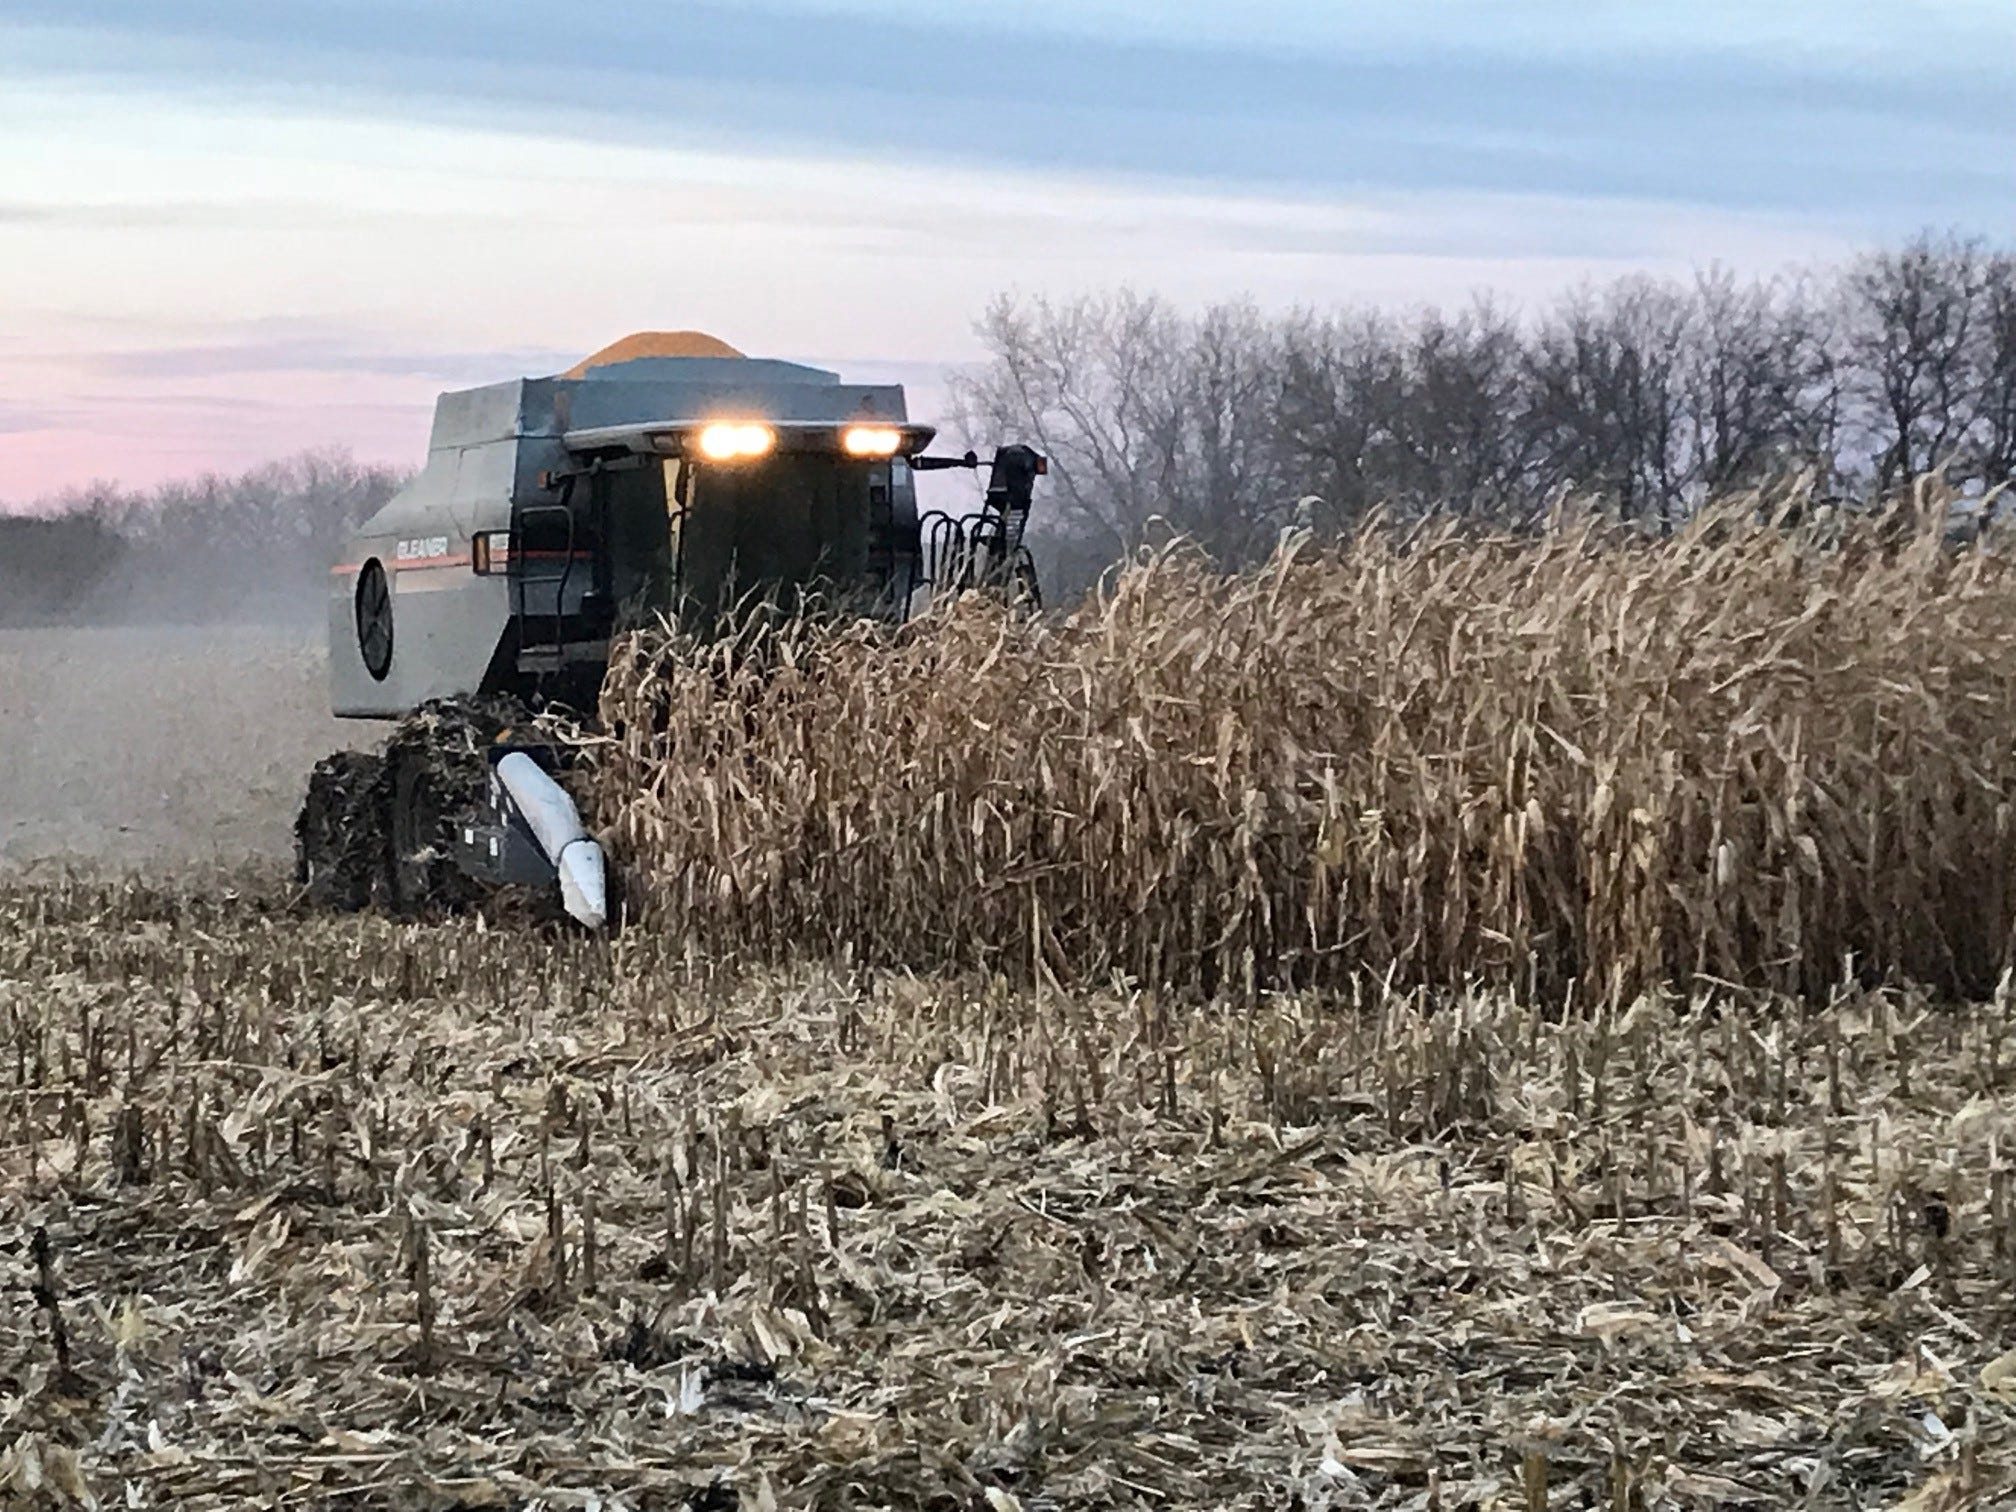 Last fall, wet conditions slowed farm machinery down in the fields. Unfortunately Mother Nature picked up where she left off, preventing farmers from making much planting progress - adding to their already long list of woes for 2019.